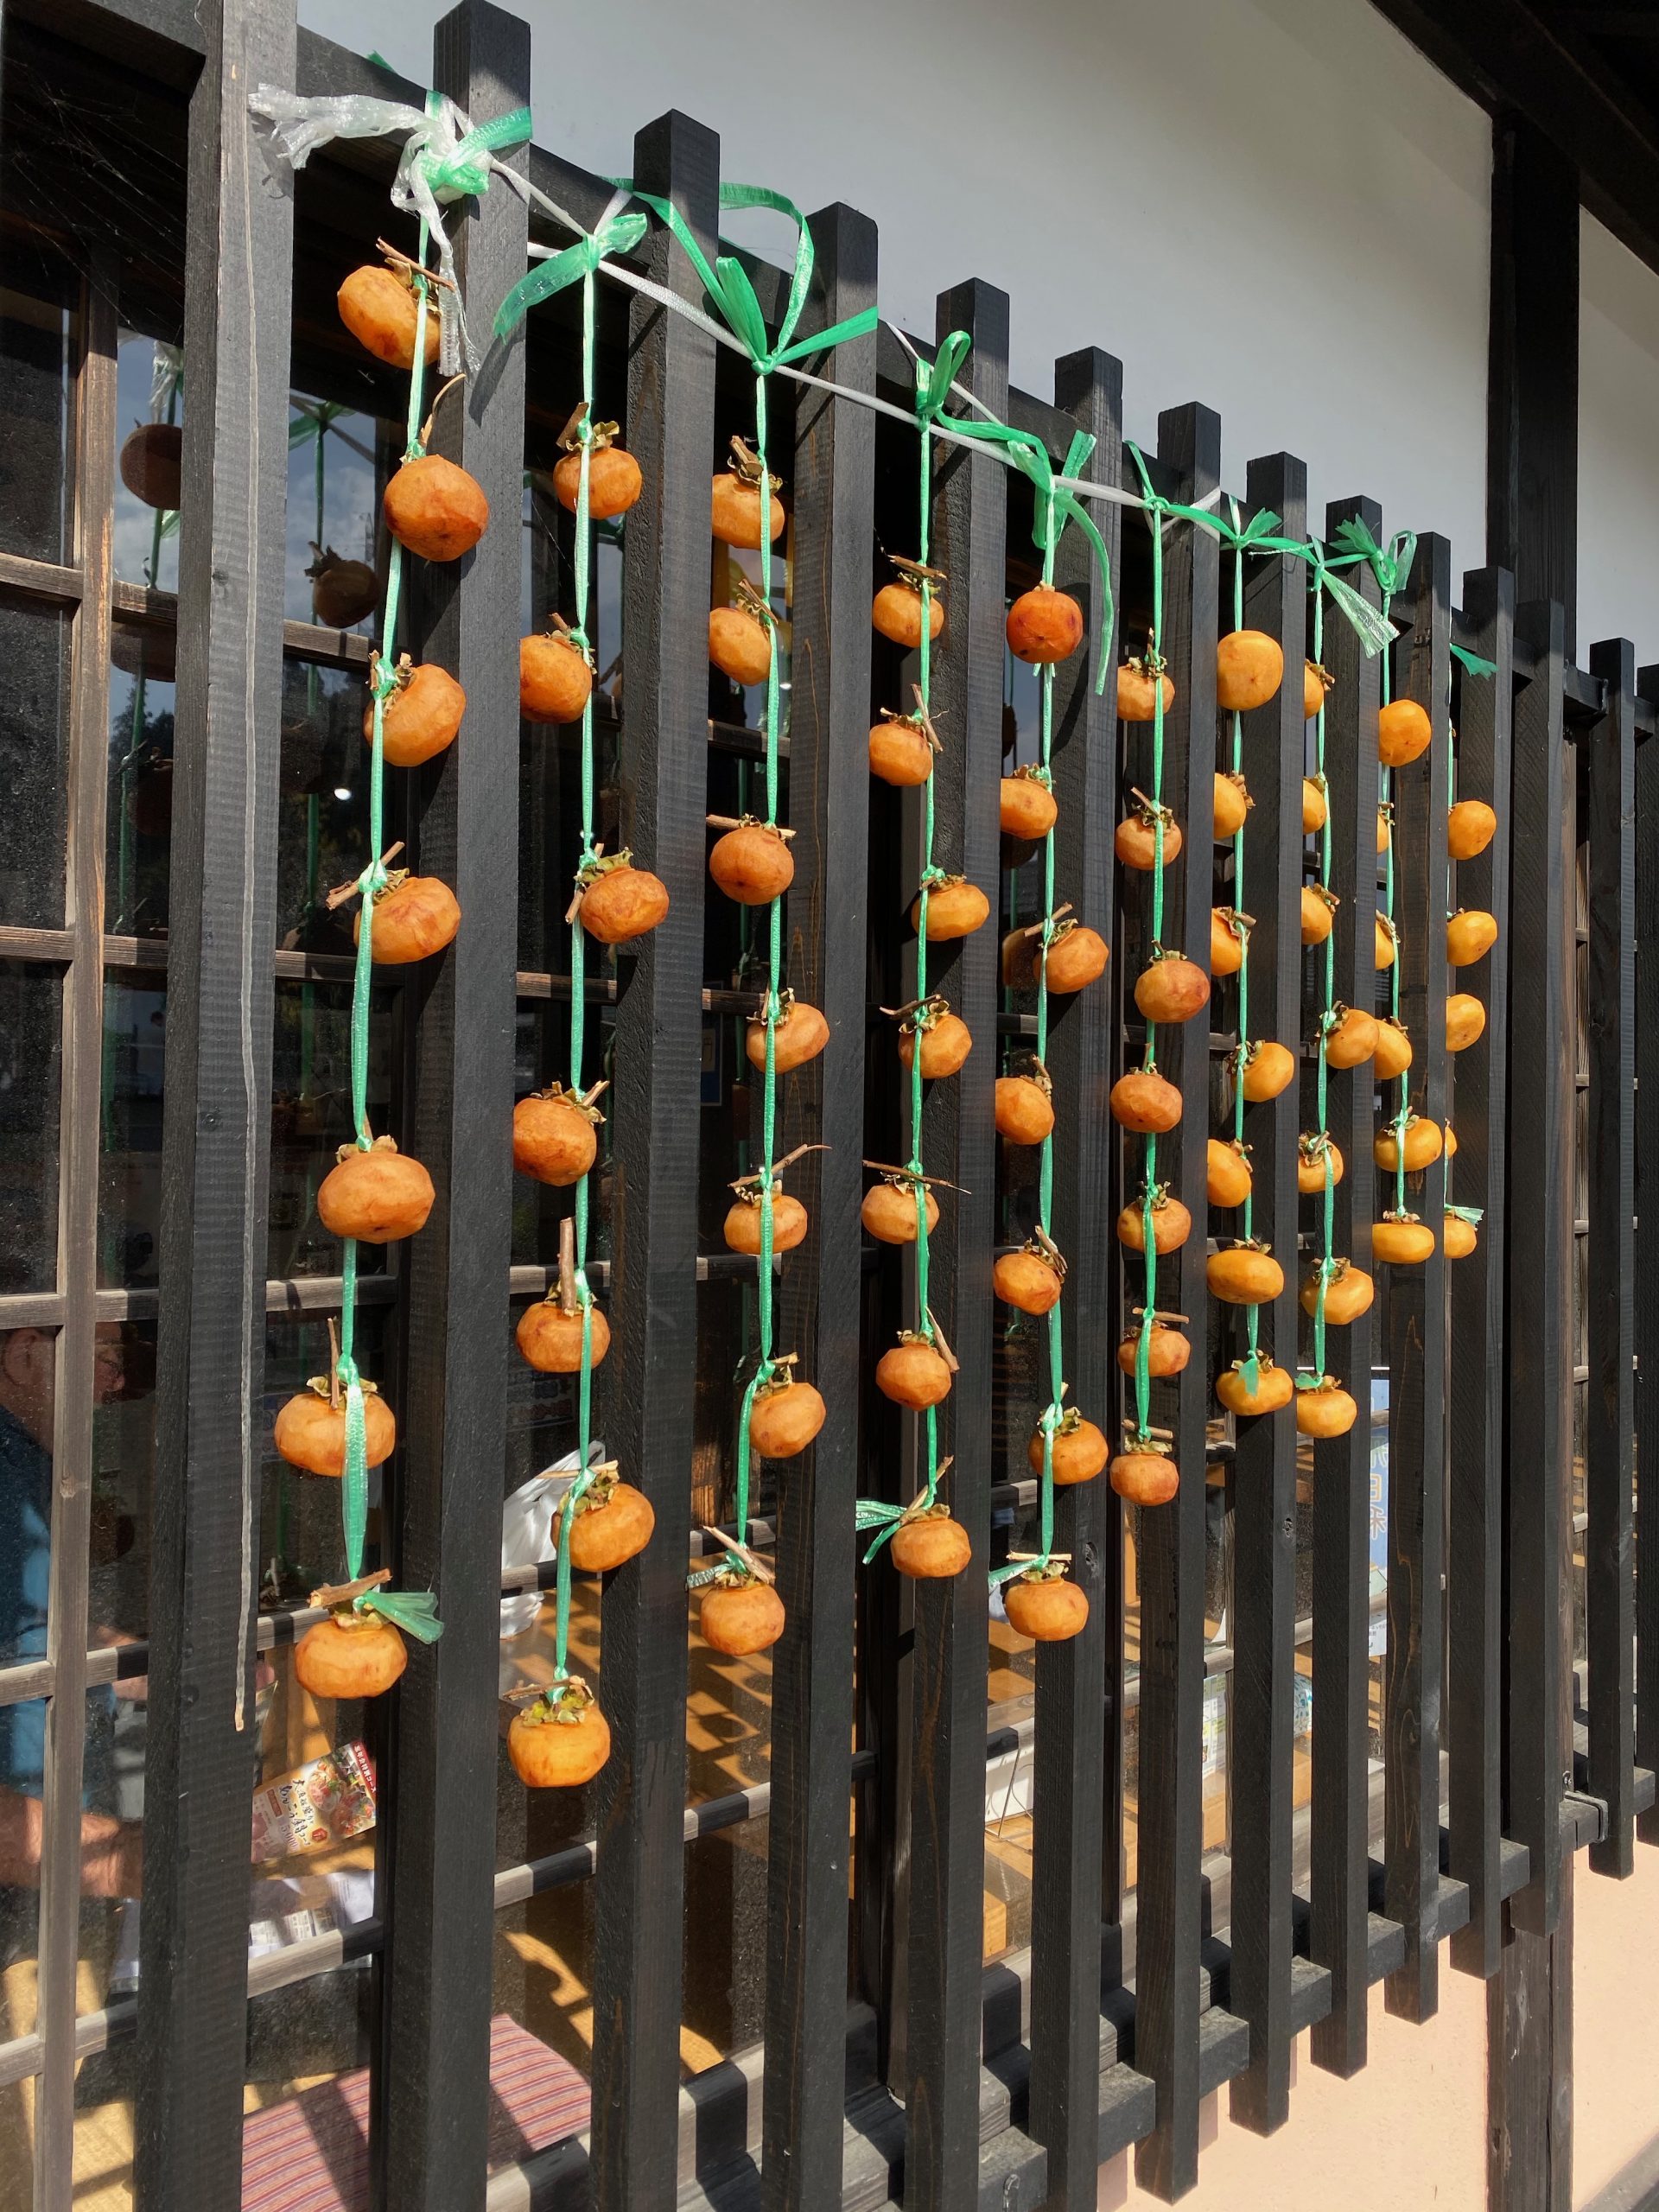 persimmons are harvested and hung outside in the crisp fall air to dry